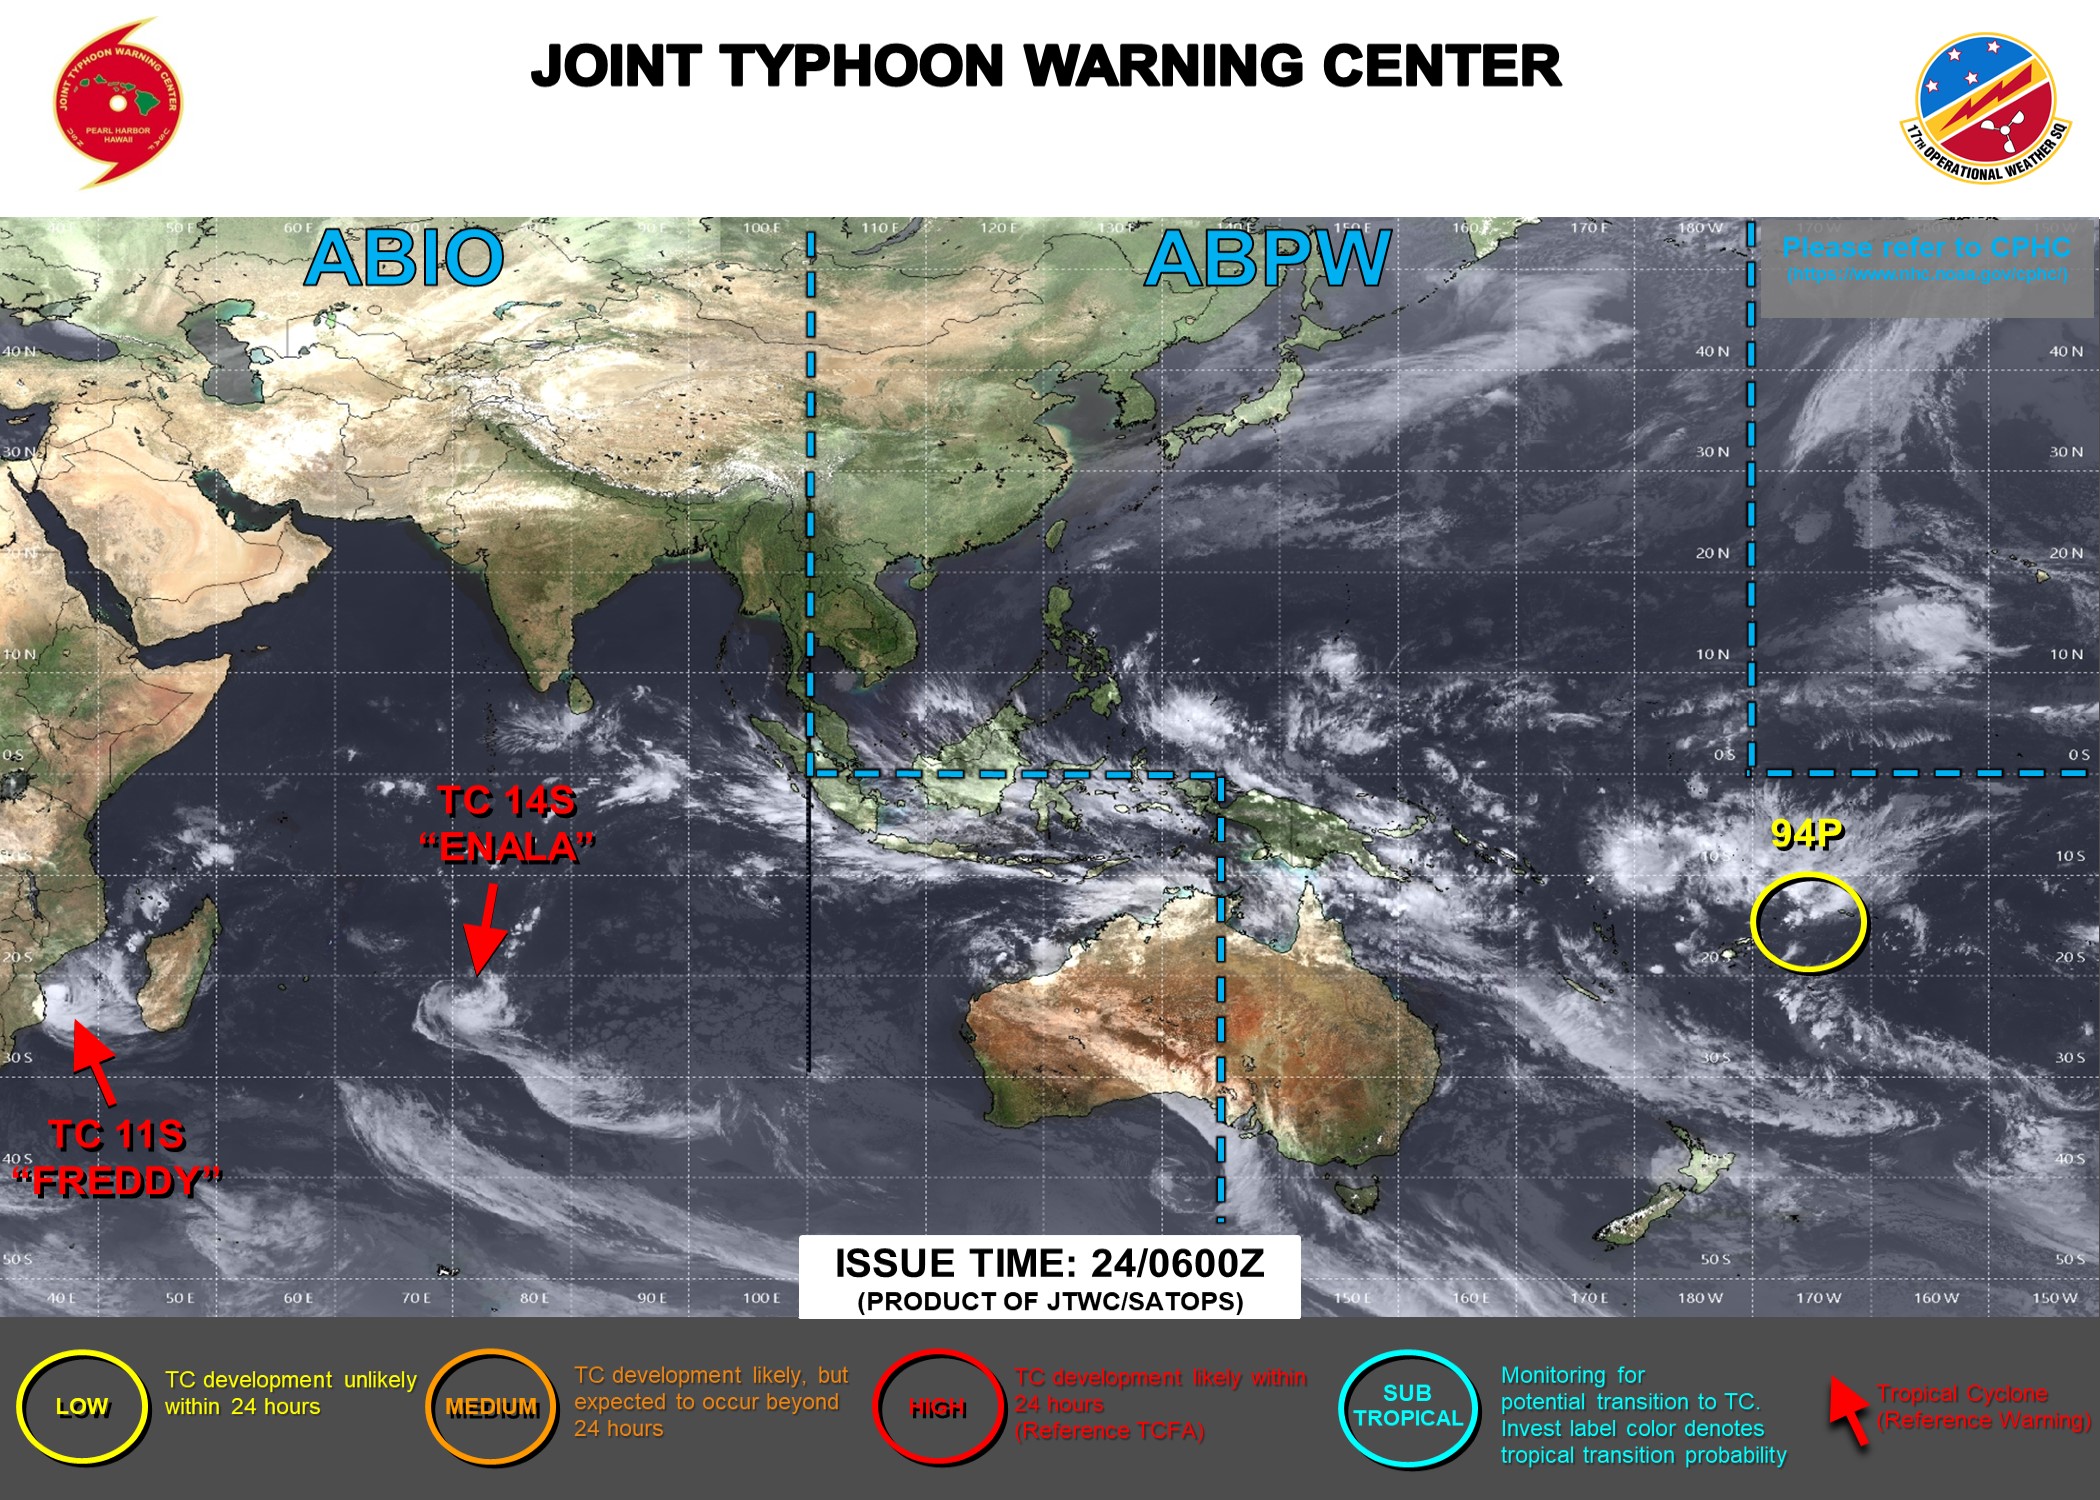 JTWC IS ISSUING 12HOURLY WARNINGS AND 3HOURLY SATELLITE BULLETINS ON TC 11S(FREDDY) AND TC 14S(ENALA).